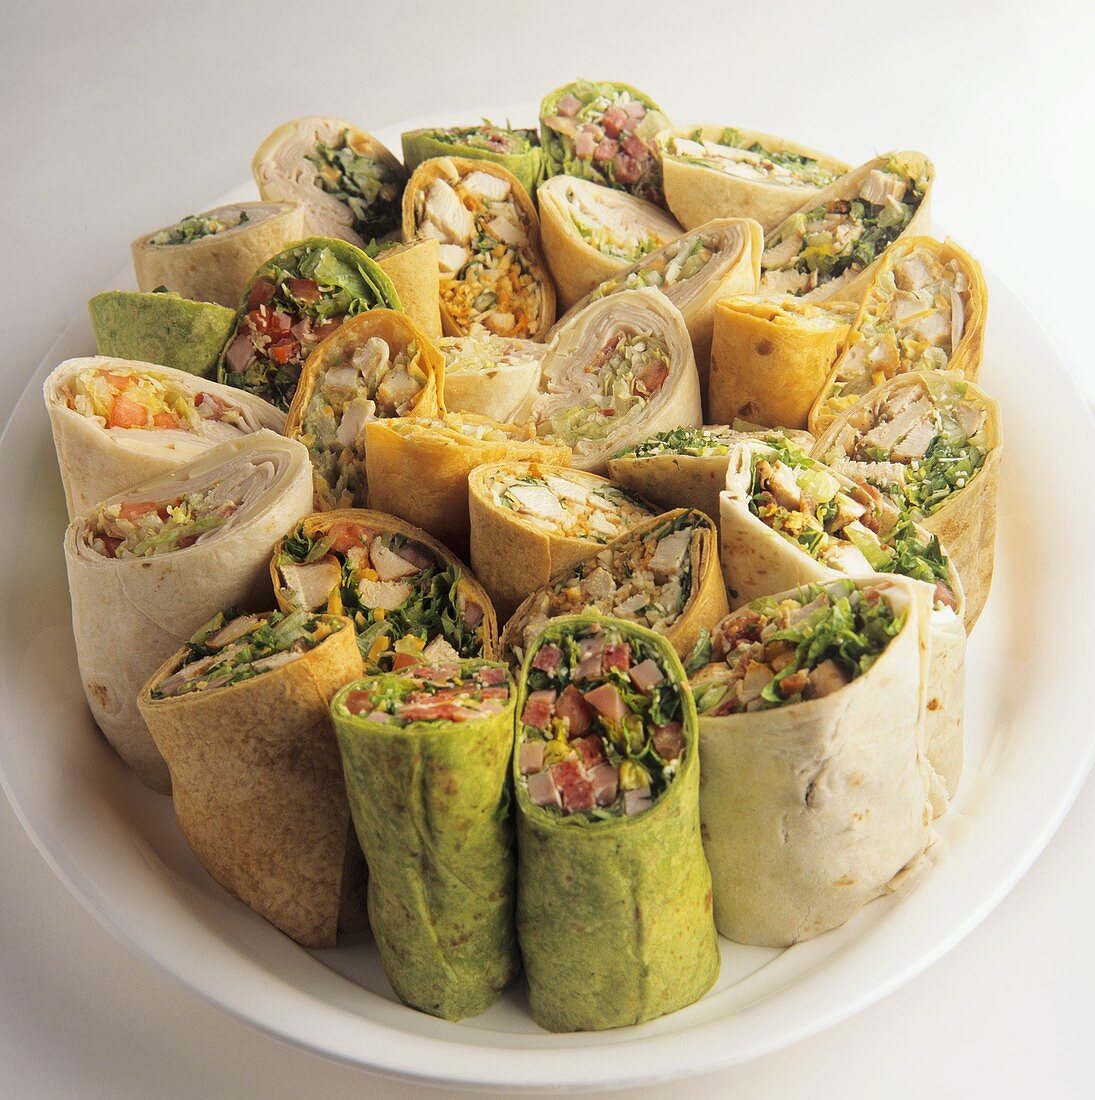 Platter of Assorted Wraps